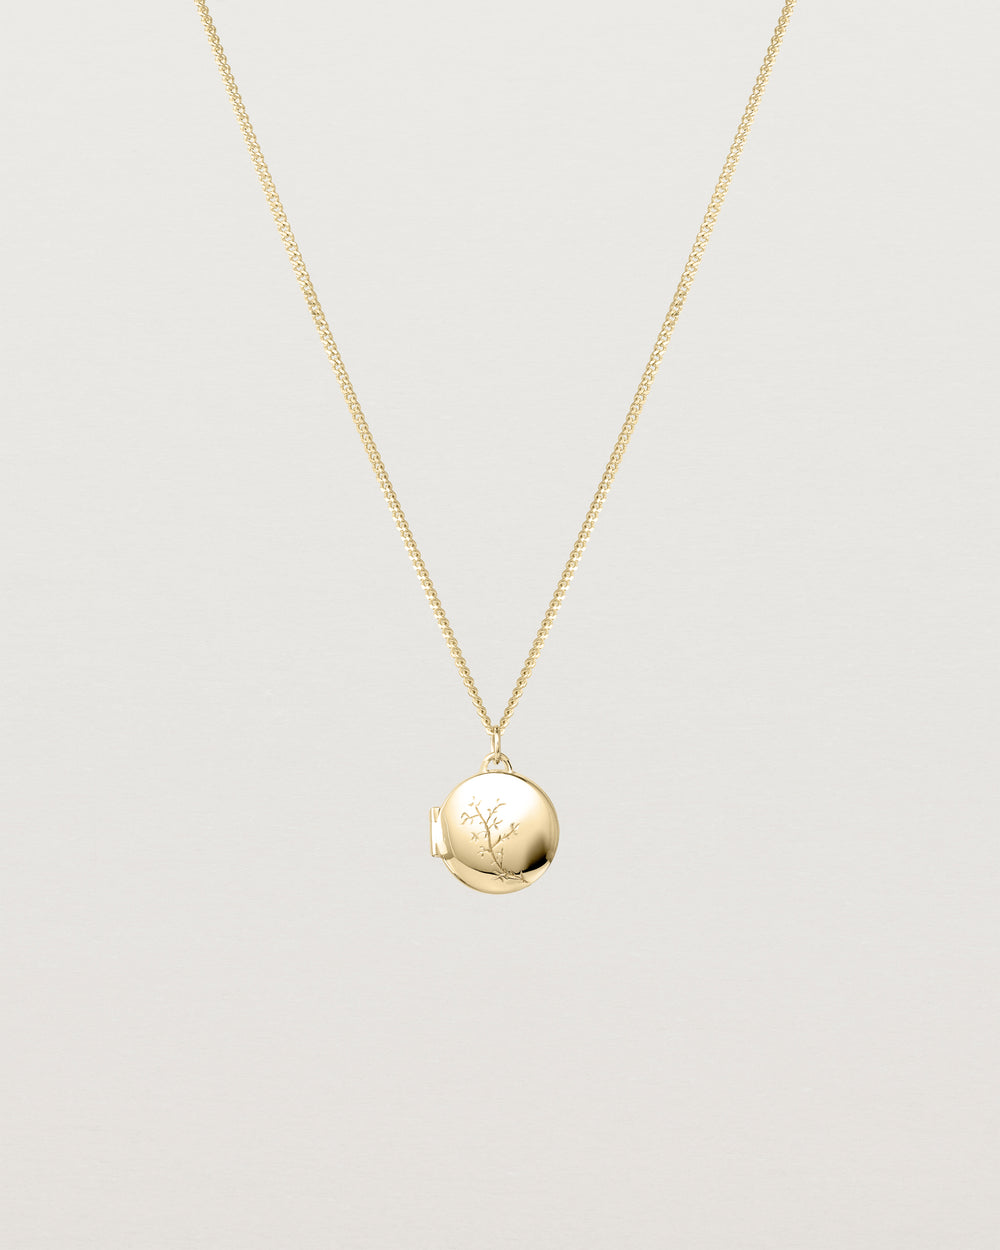 Shop Necklaces | Initial & Gold Necklaces | Natalie Marie Jewellery ...